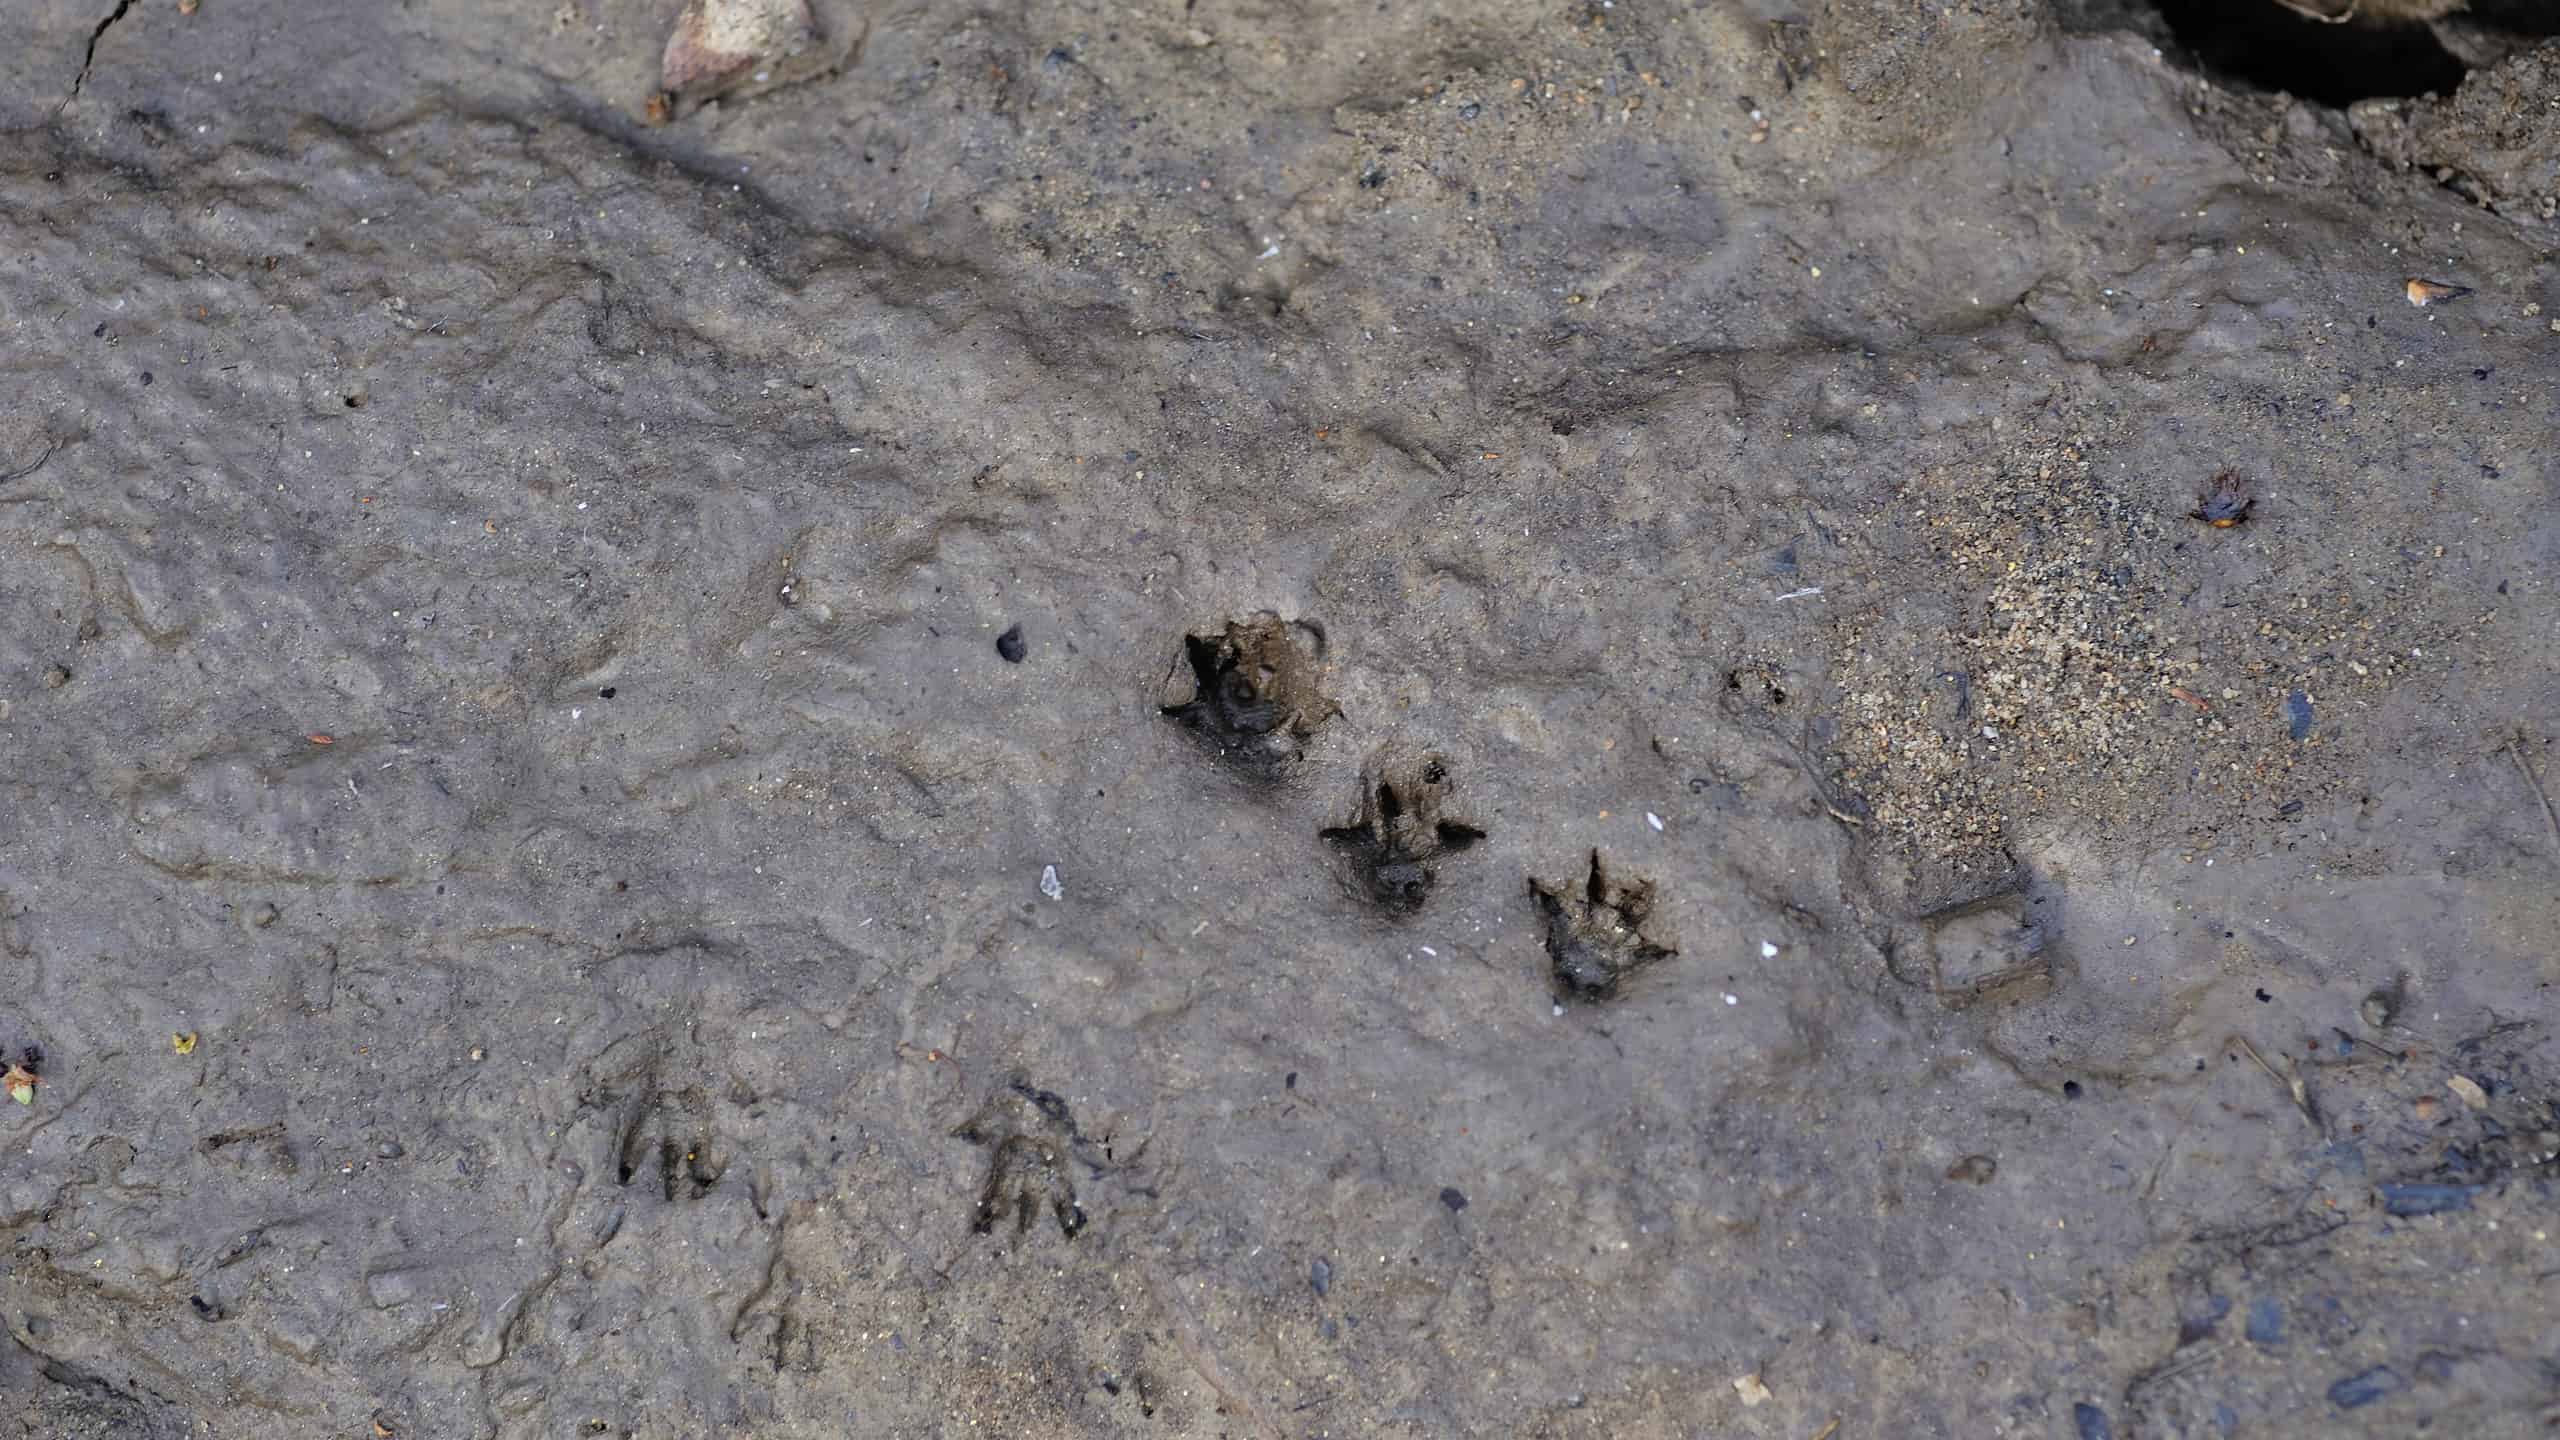 Small rodent tracks in mud